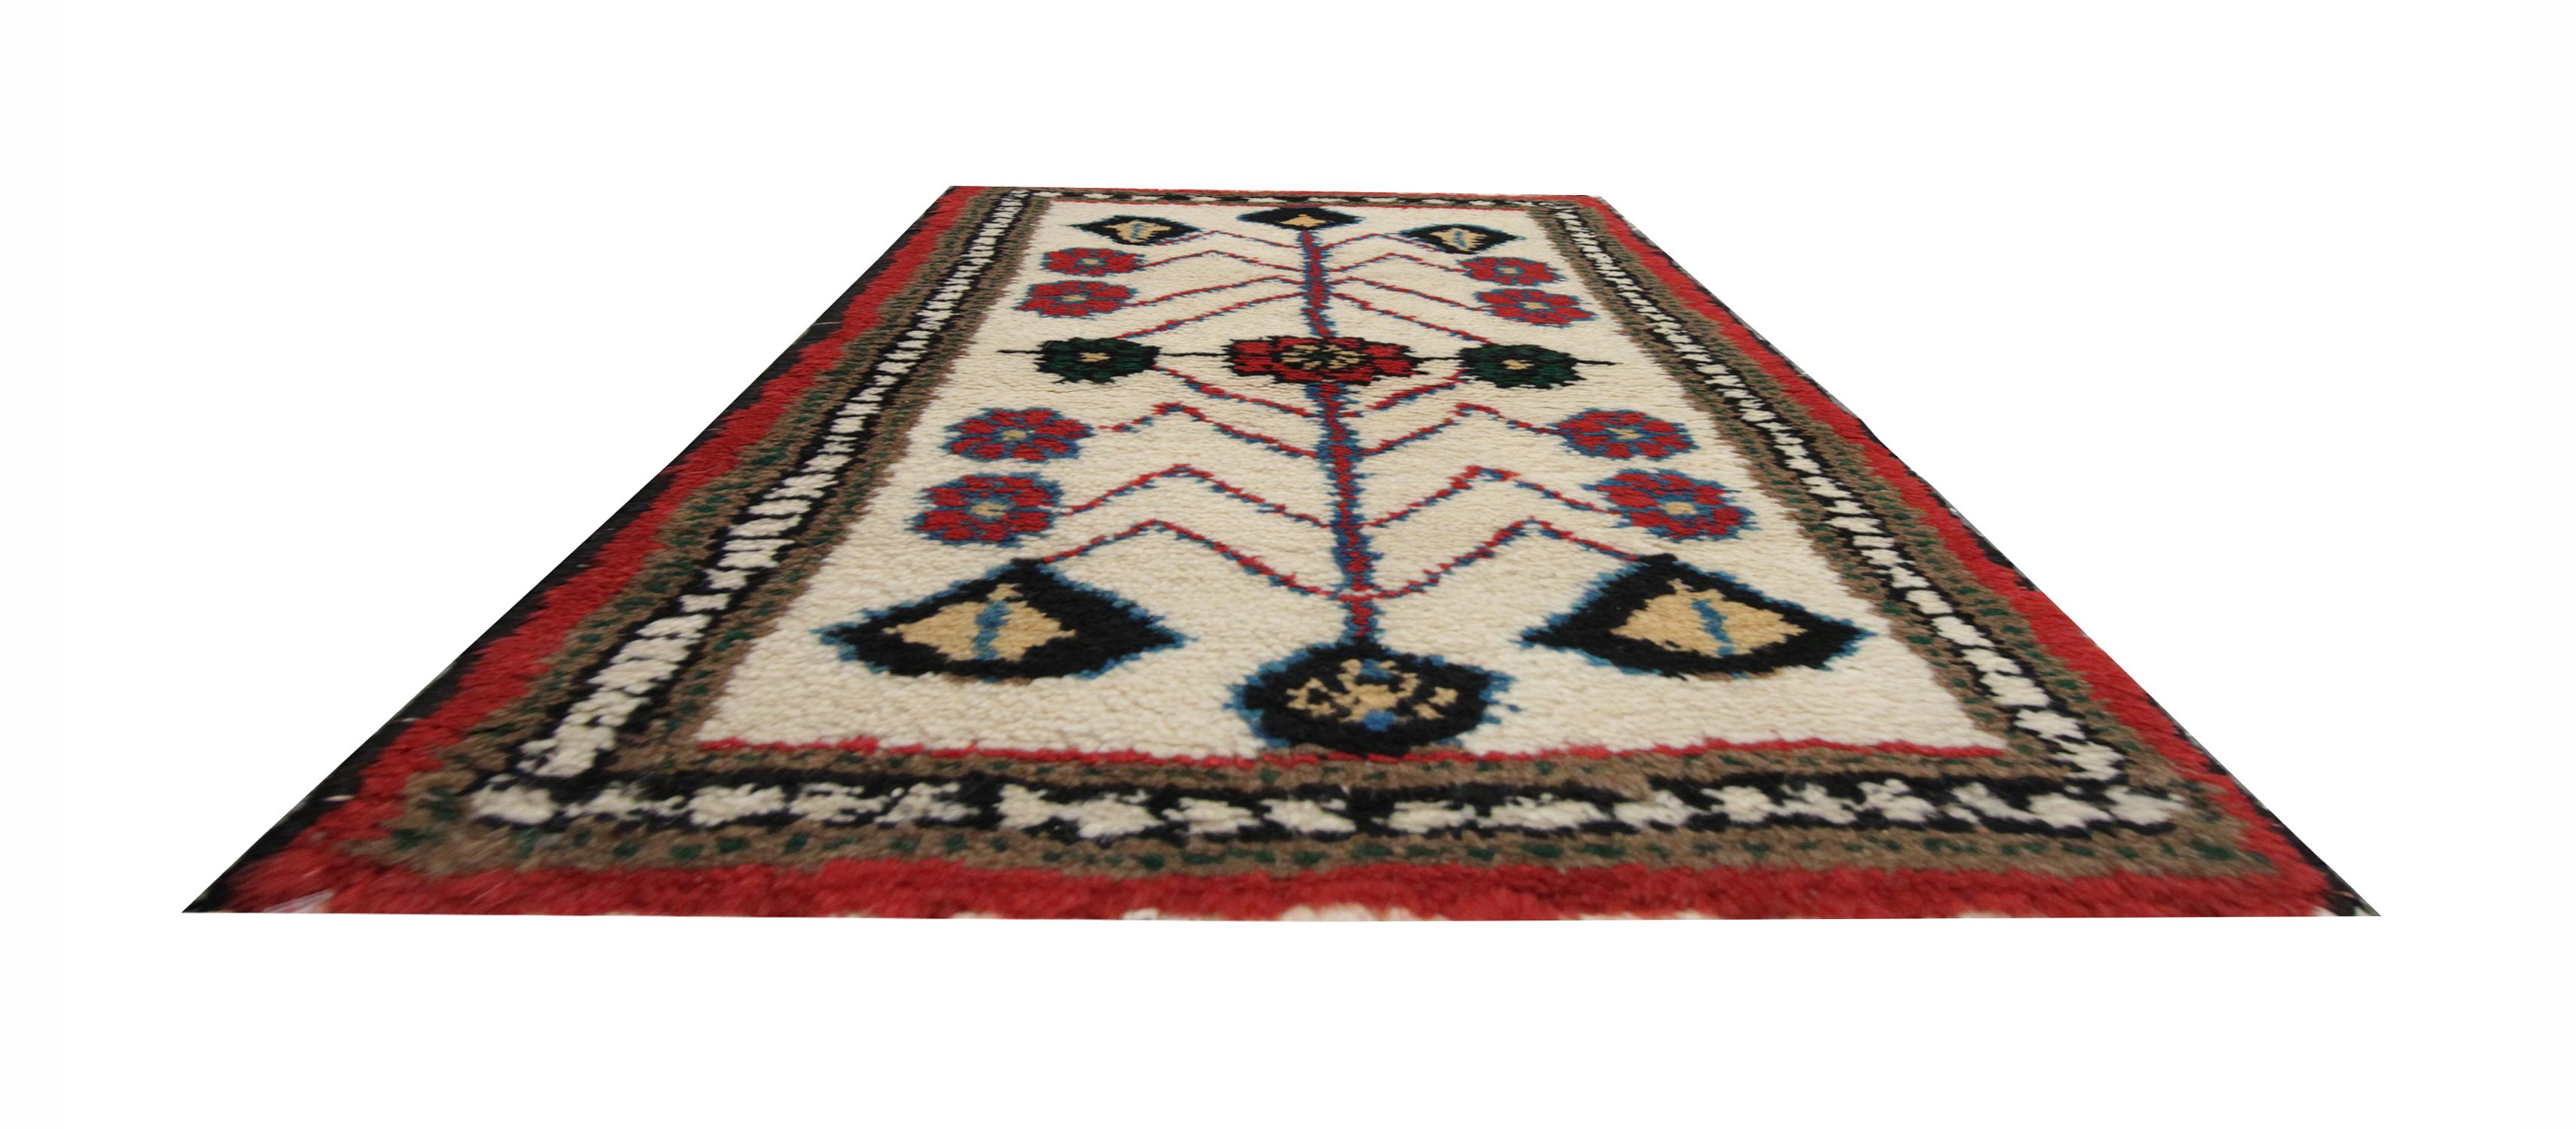 This wool carpet has been woven with a simple tribal design, symmetrically designed with a tribal pattern. Constructed with a simple colour palette of red, blue, and green accents with a cream/ivory background. Both the colour and oriental design in